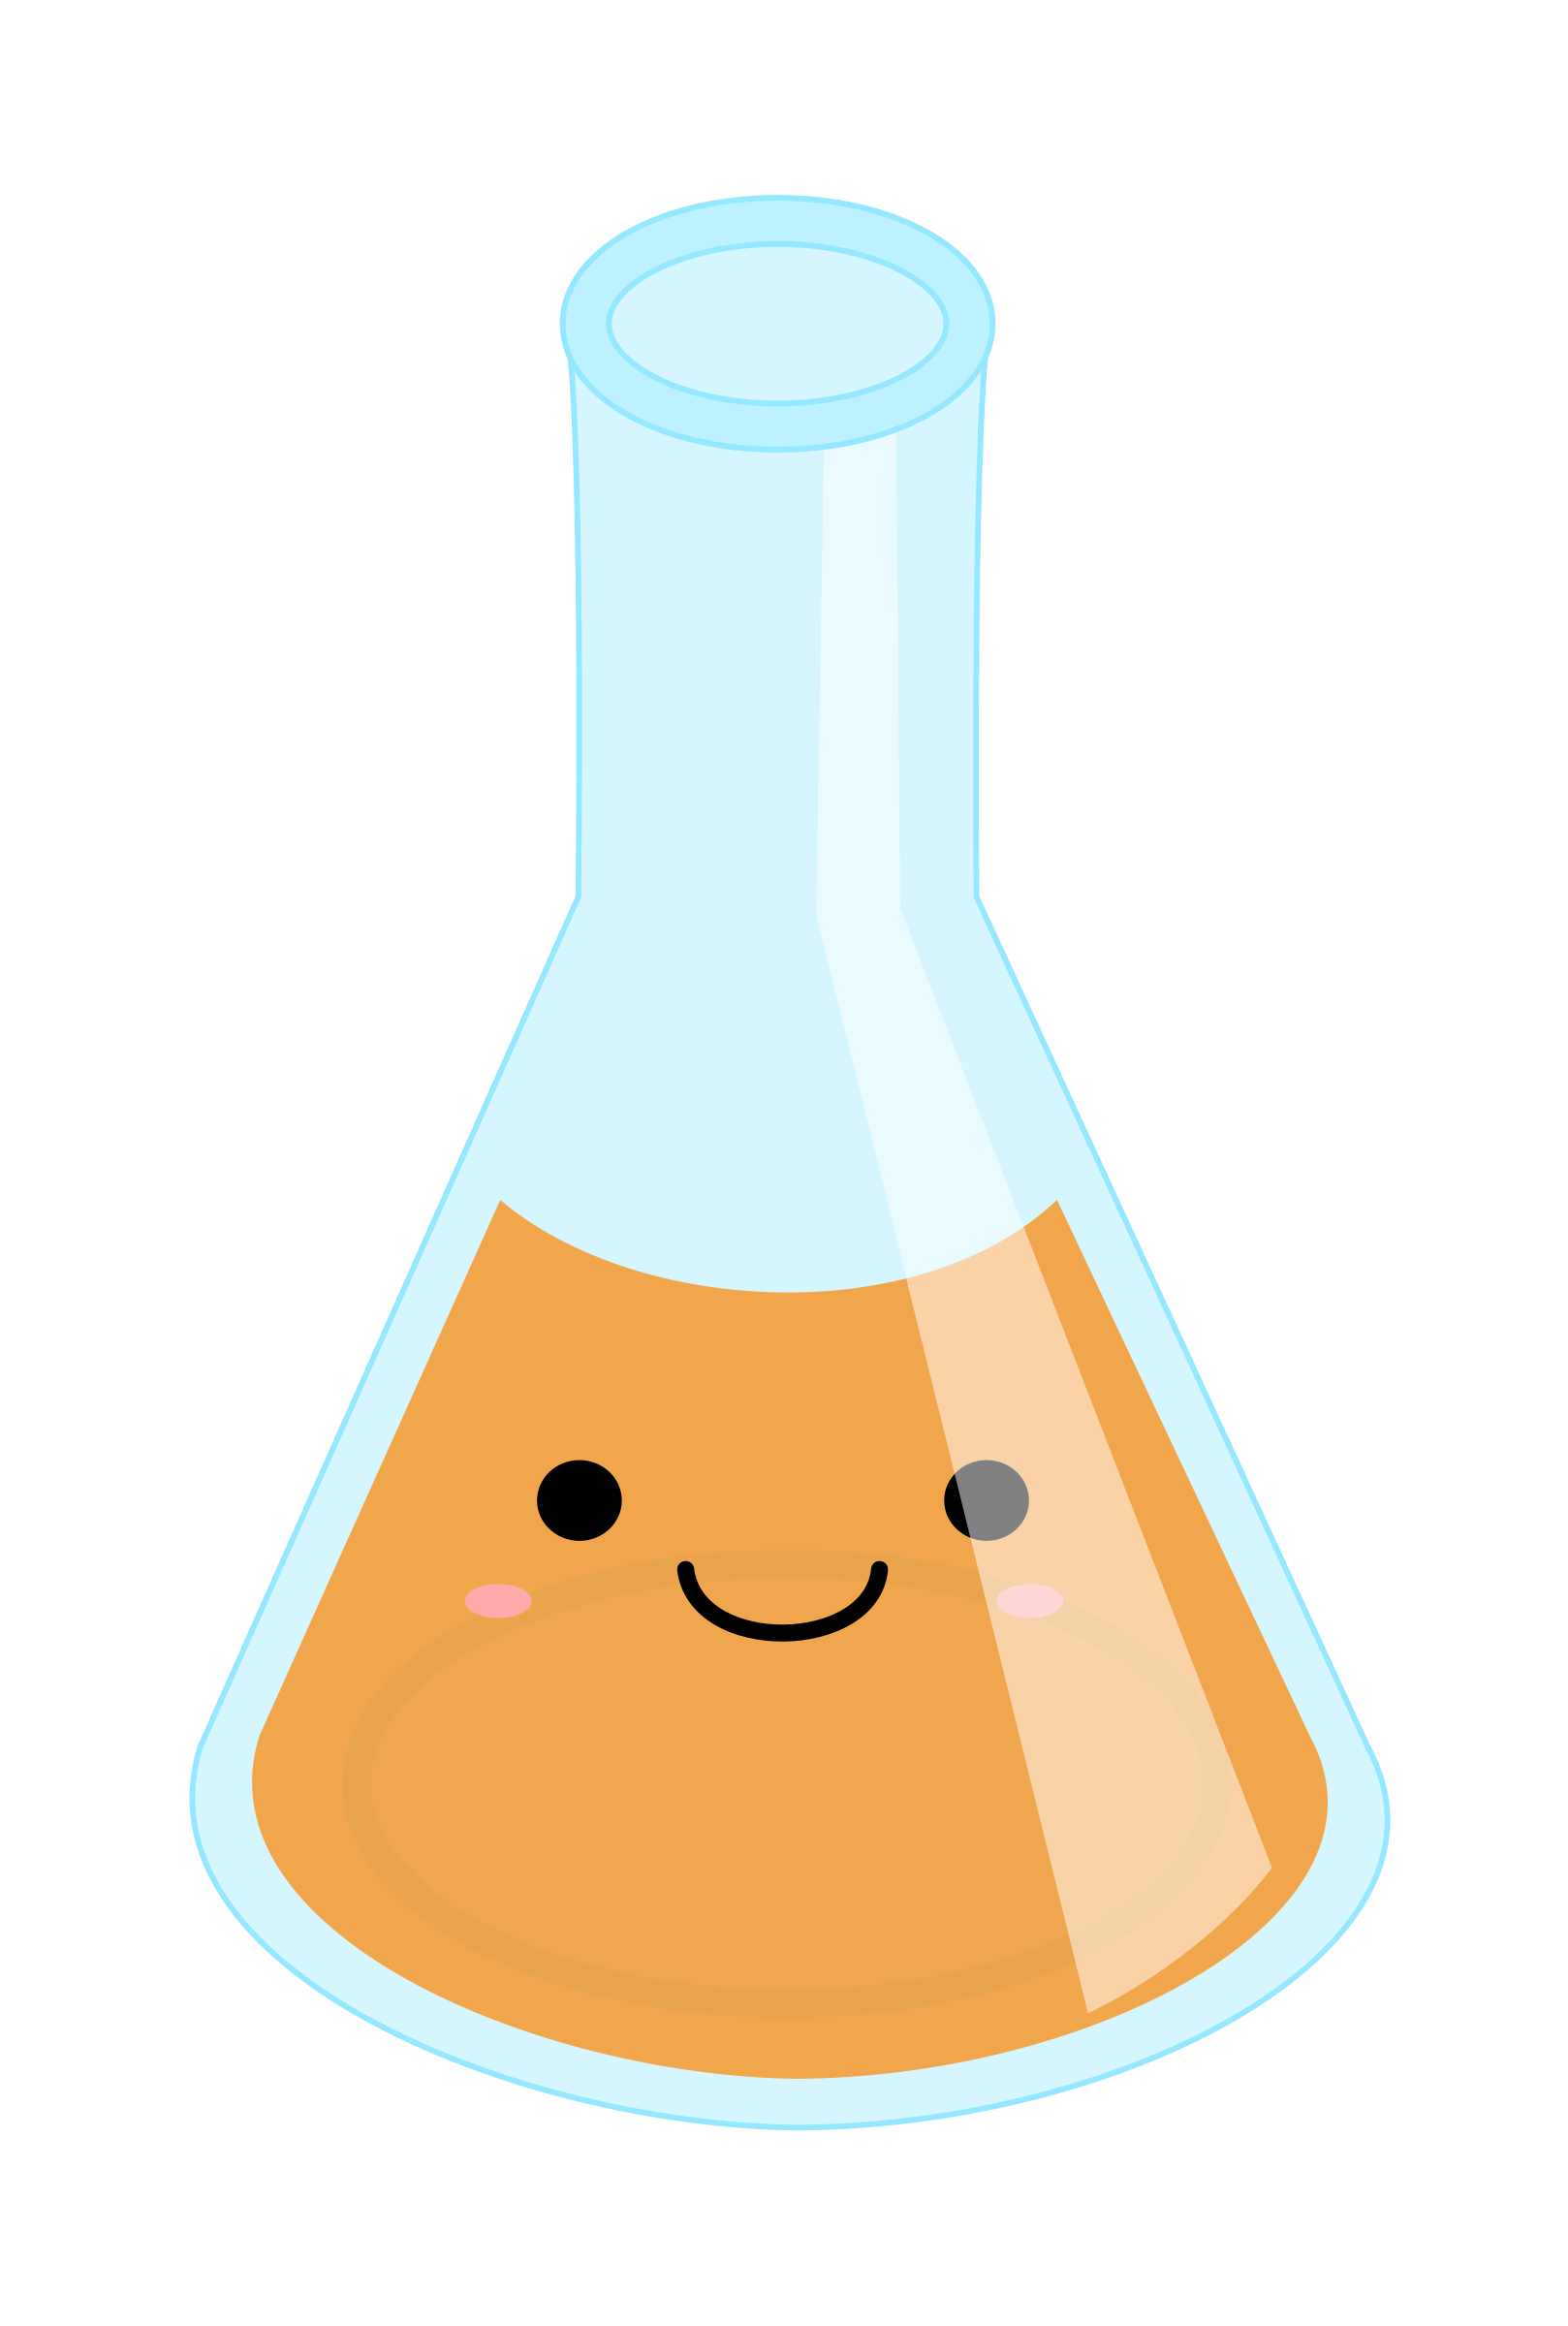 Crayons clipart kawaii. Full erlenmeyer flask by